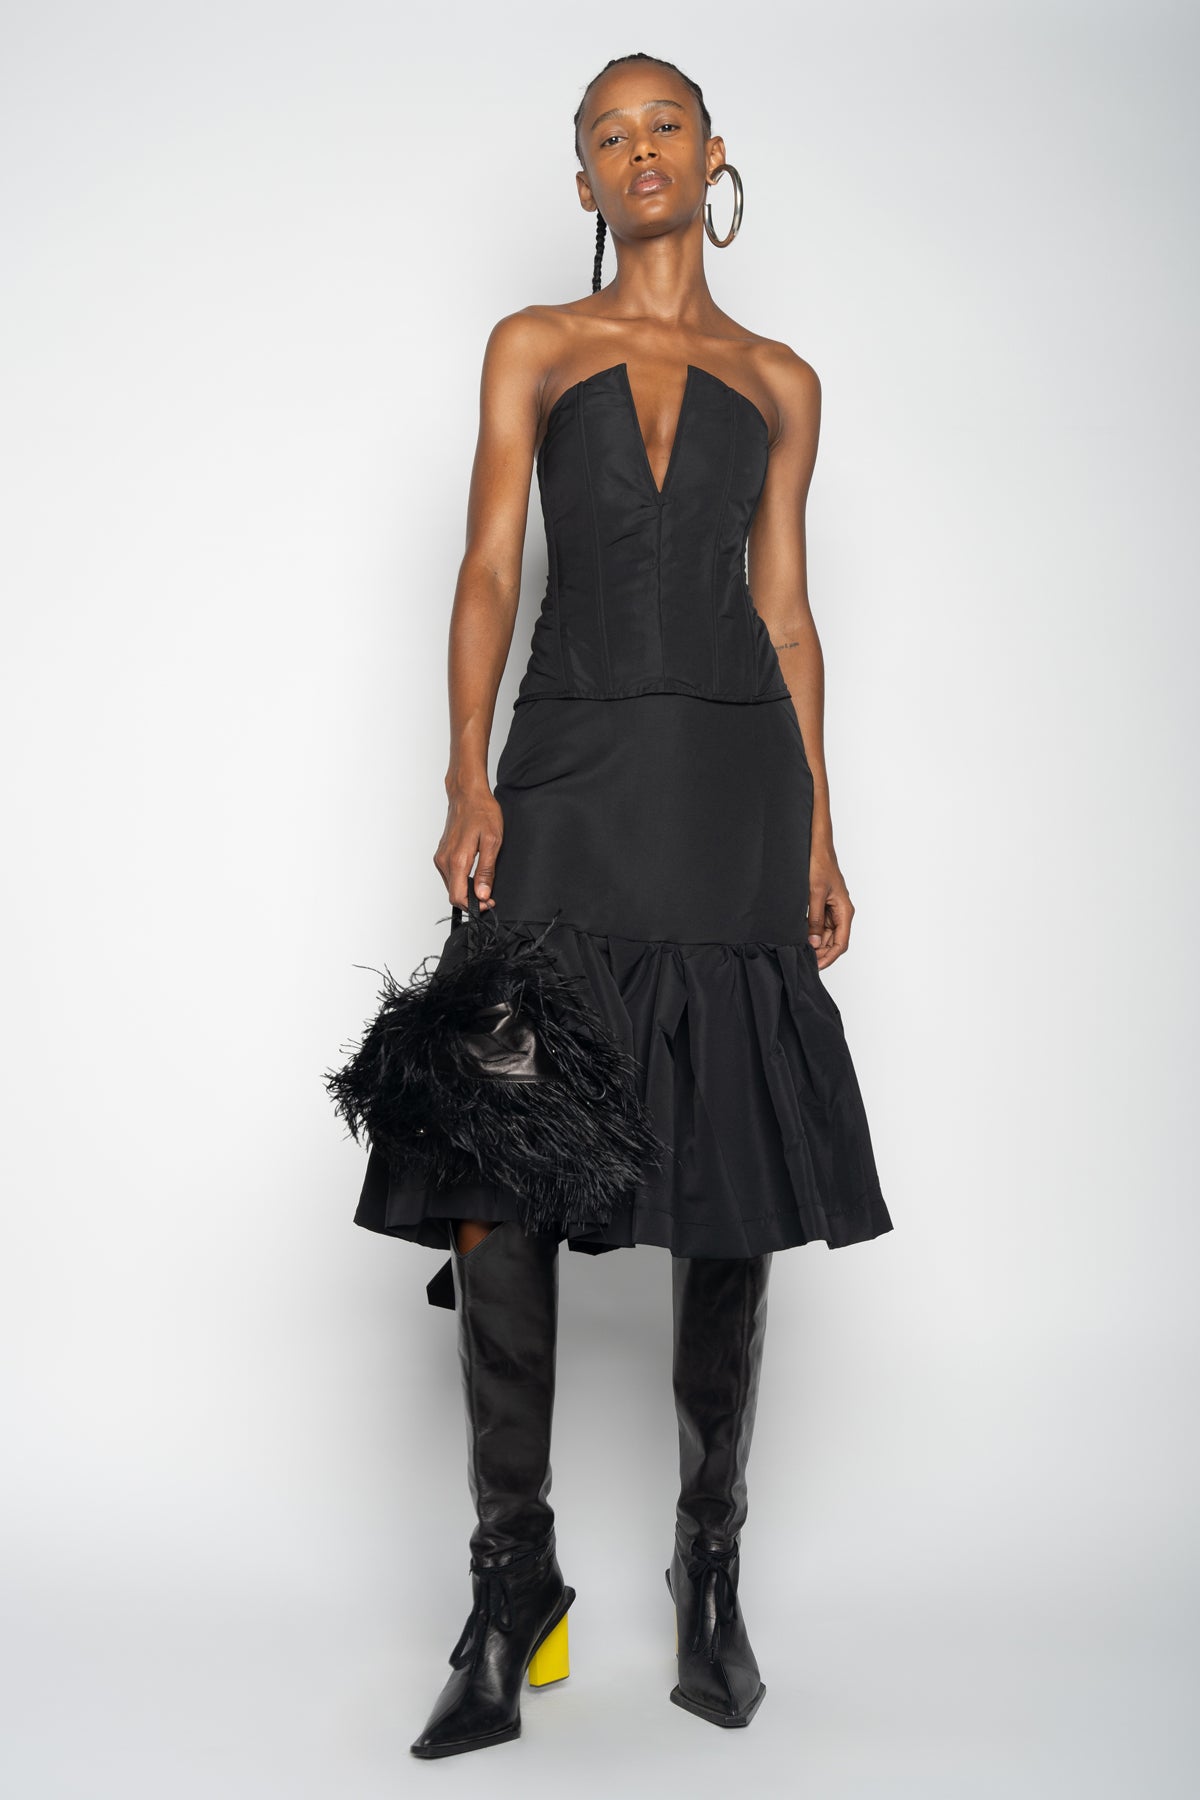 BLACK FITTED SKIRT marques almeida